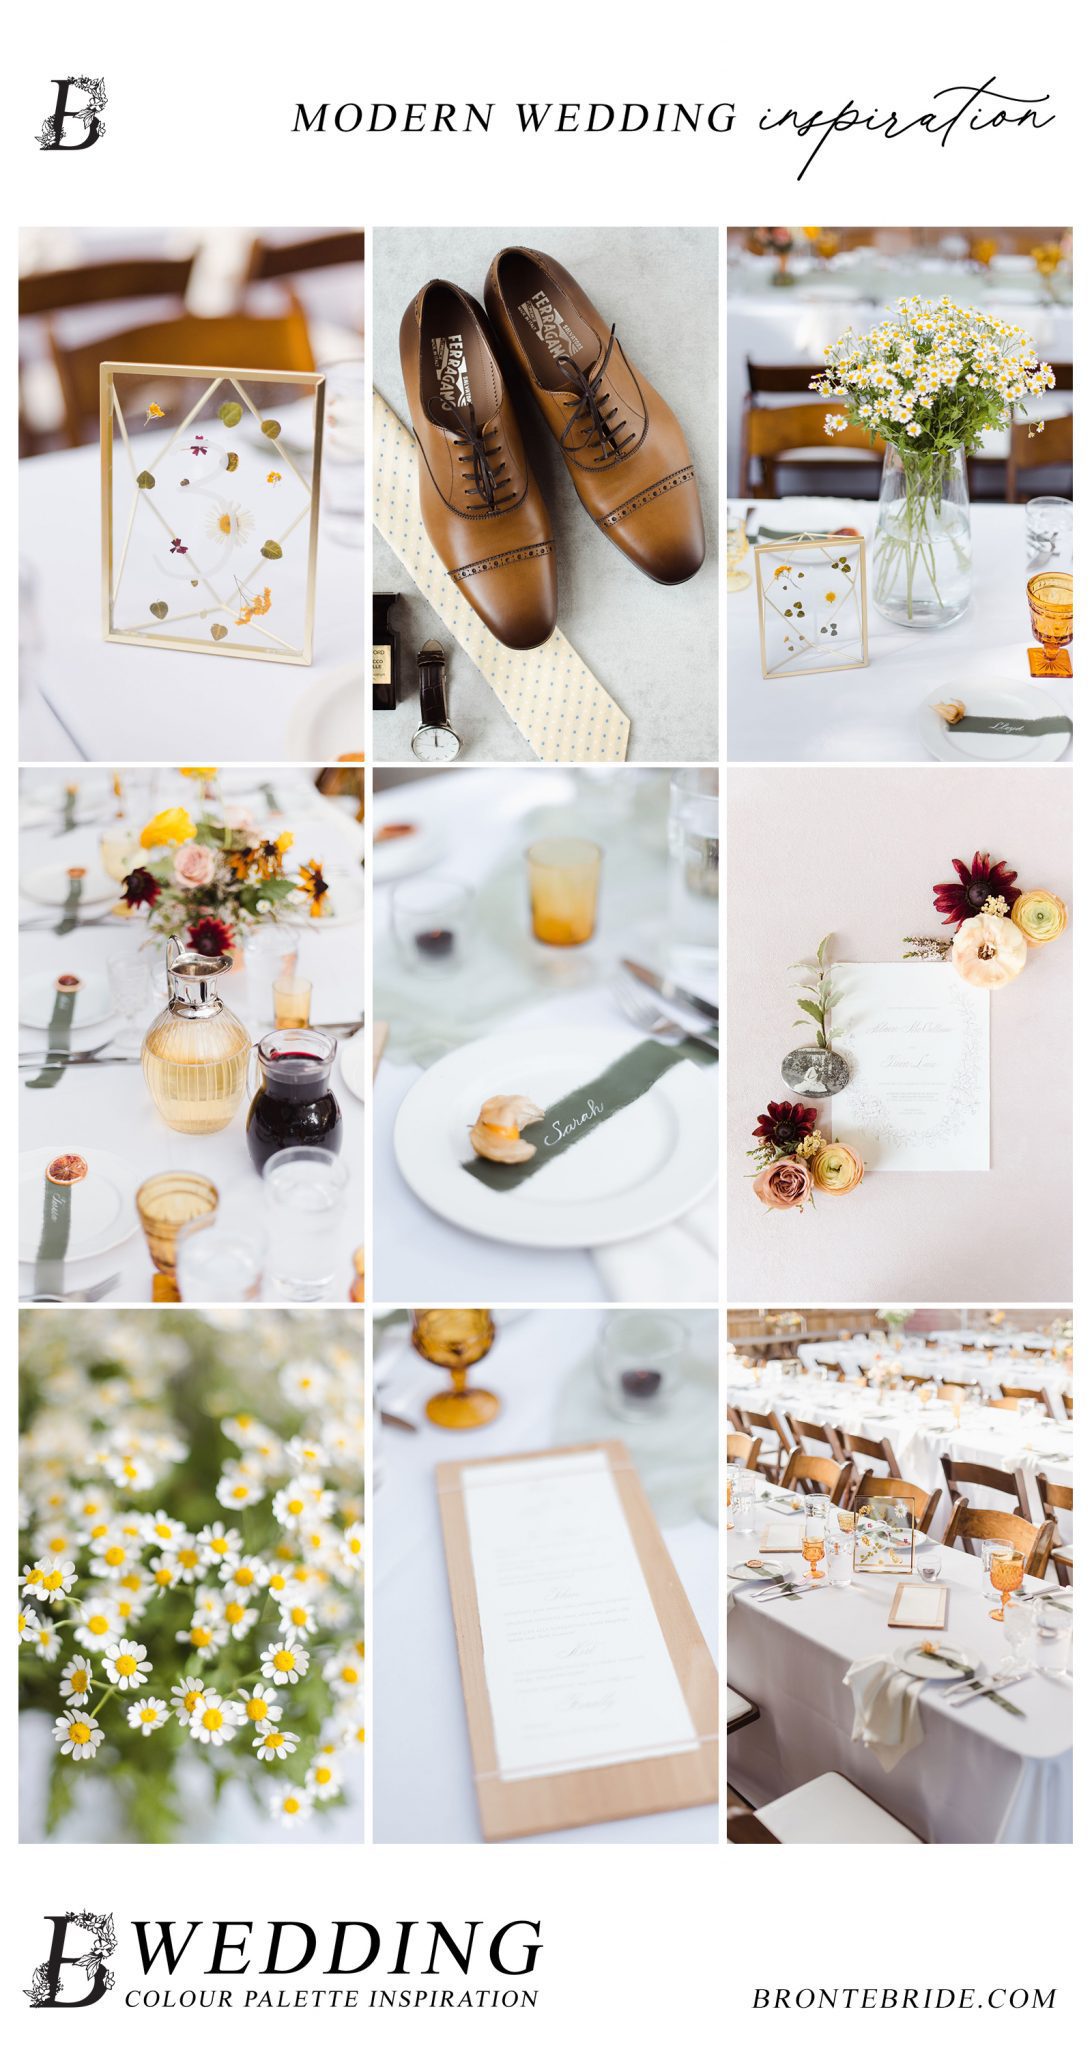 Colourful Summer Wedding Inspiration - Whimsical Florals & Italian Food